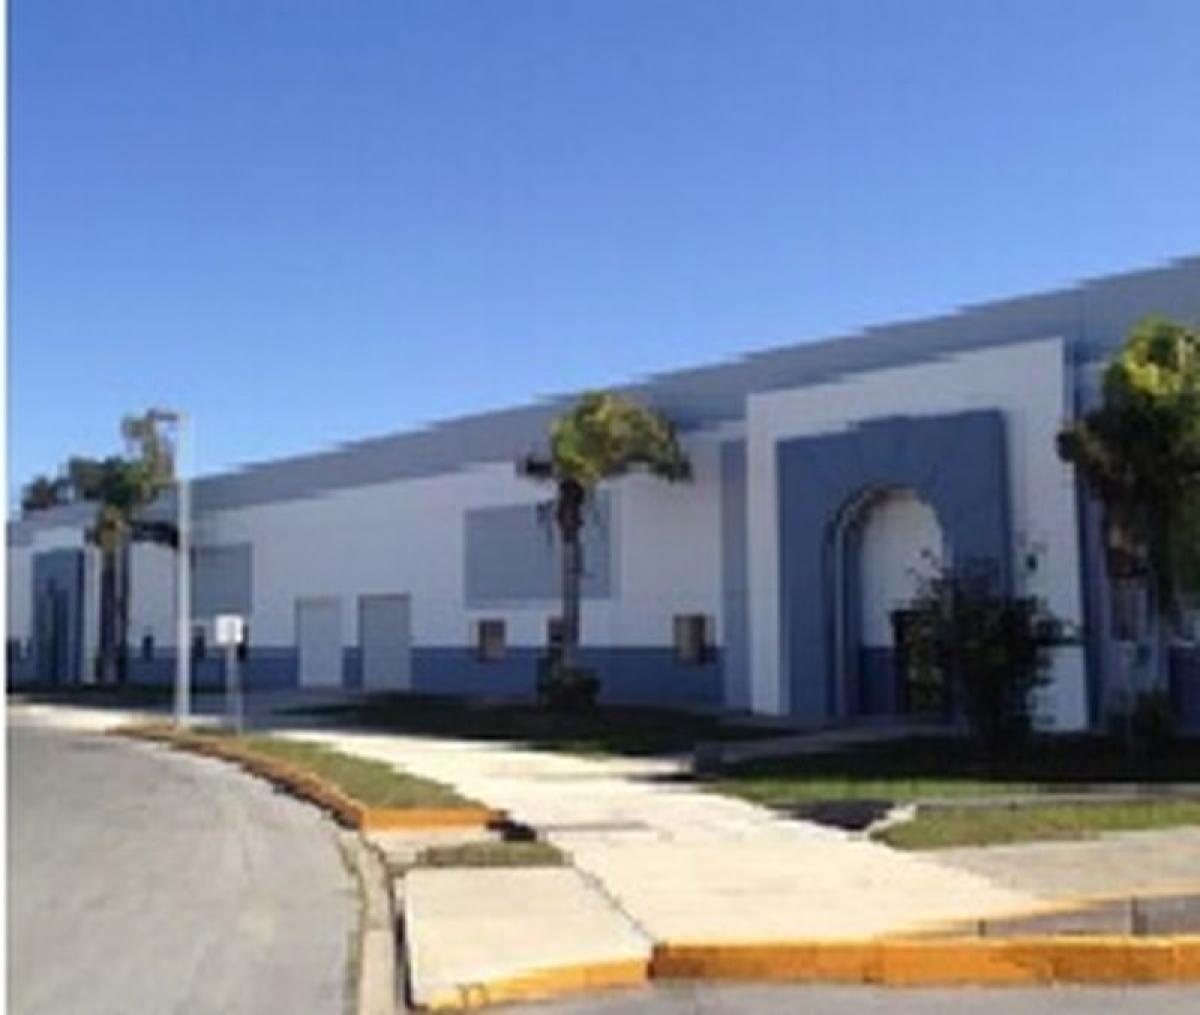 Picture of Other Commercial For Sale in Nuevo Laredo, Tamaulipas, Mexico